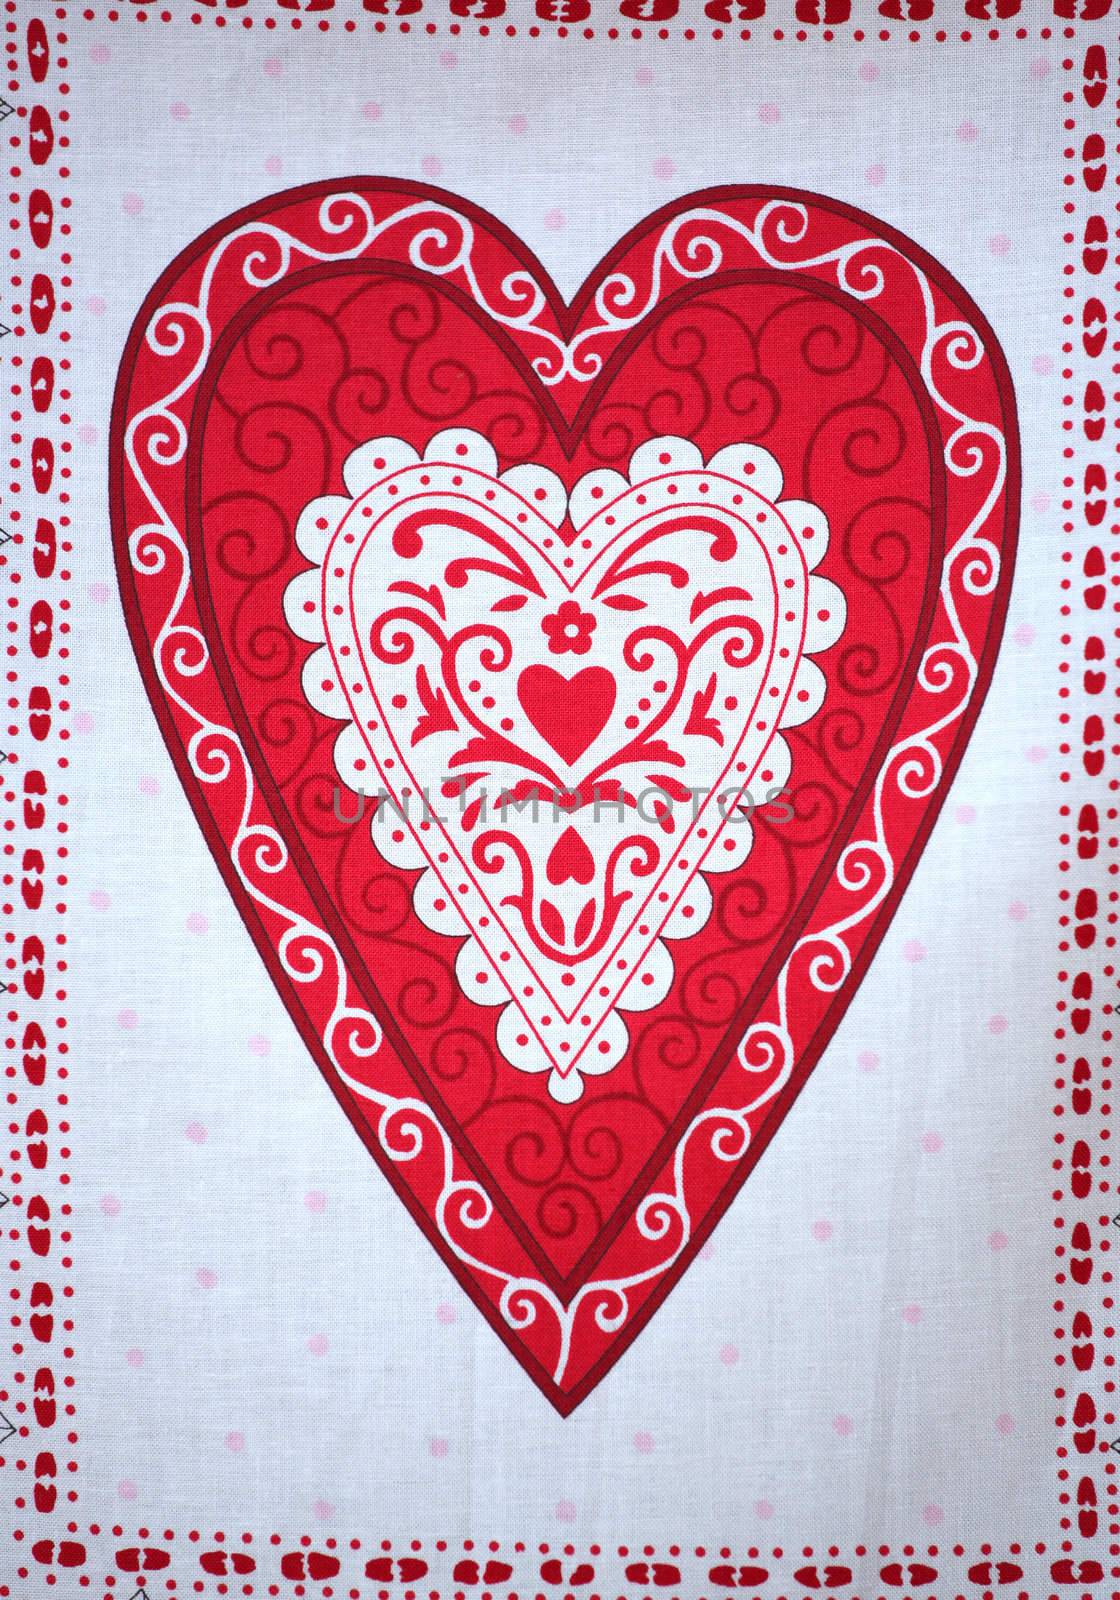 Illustration of a valentine day heart.